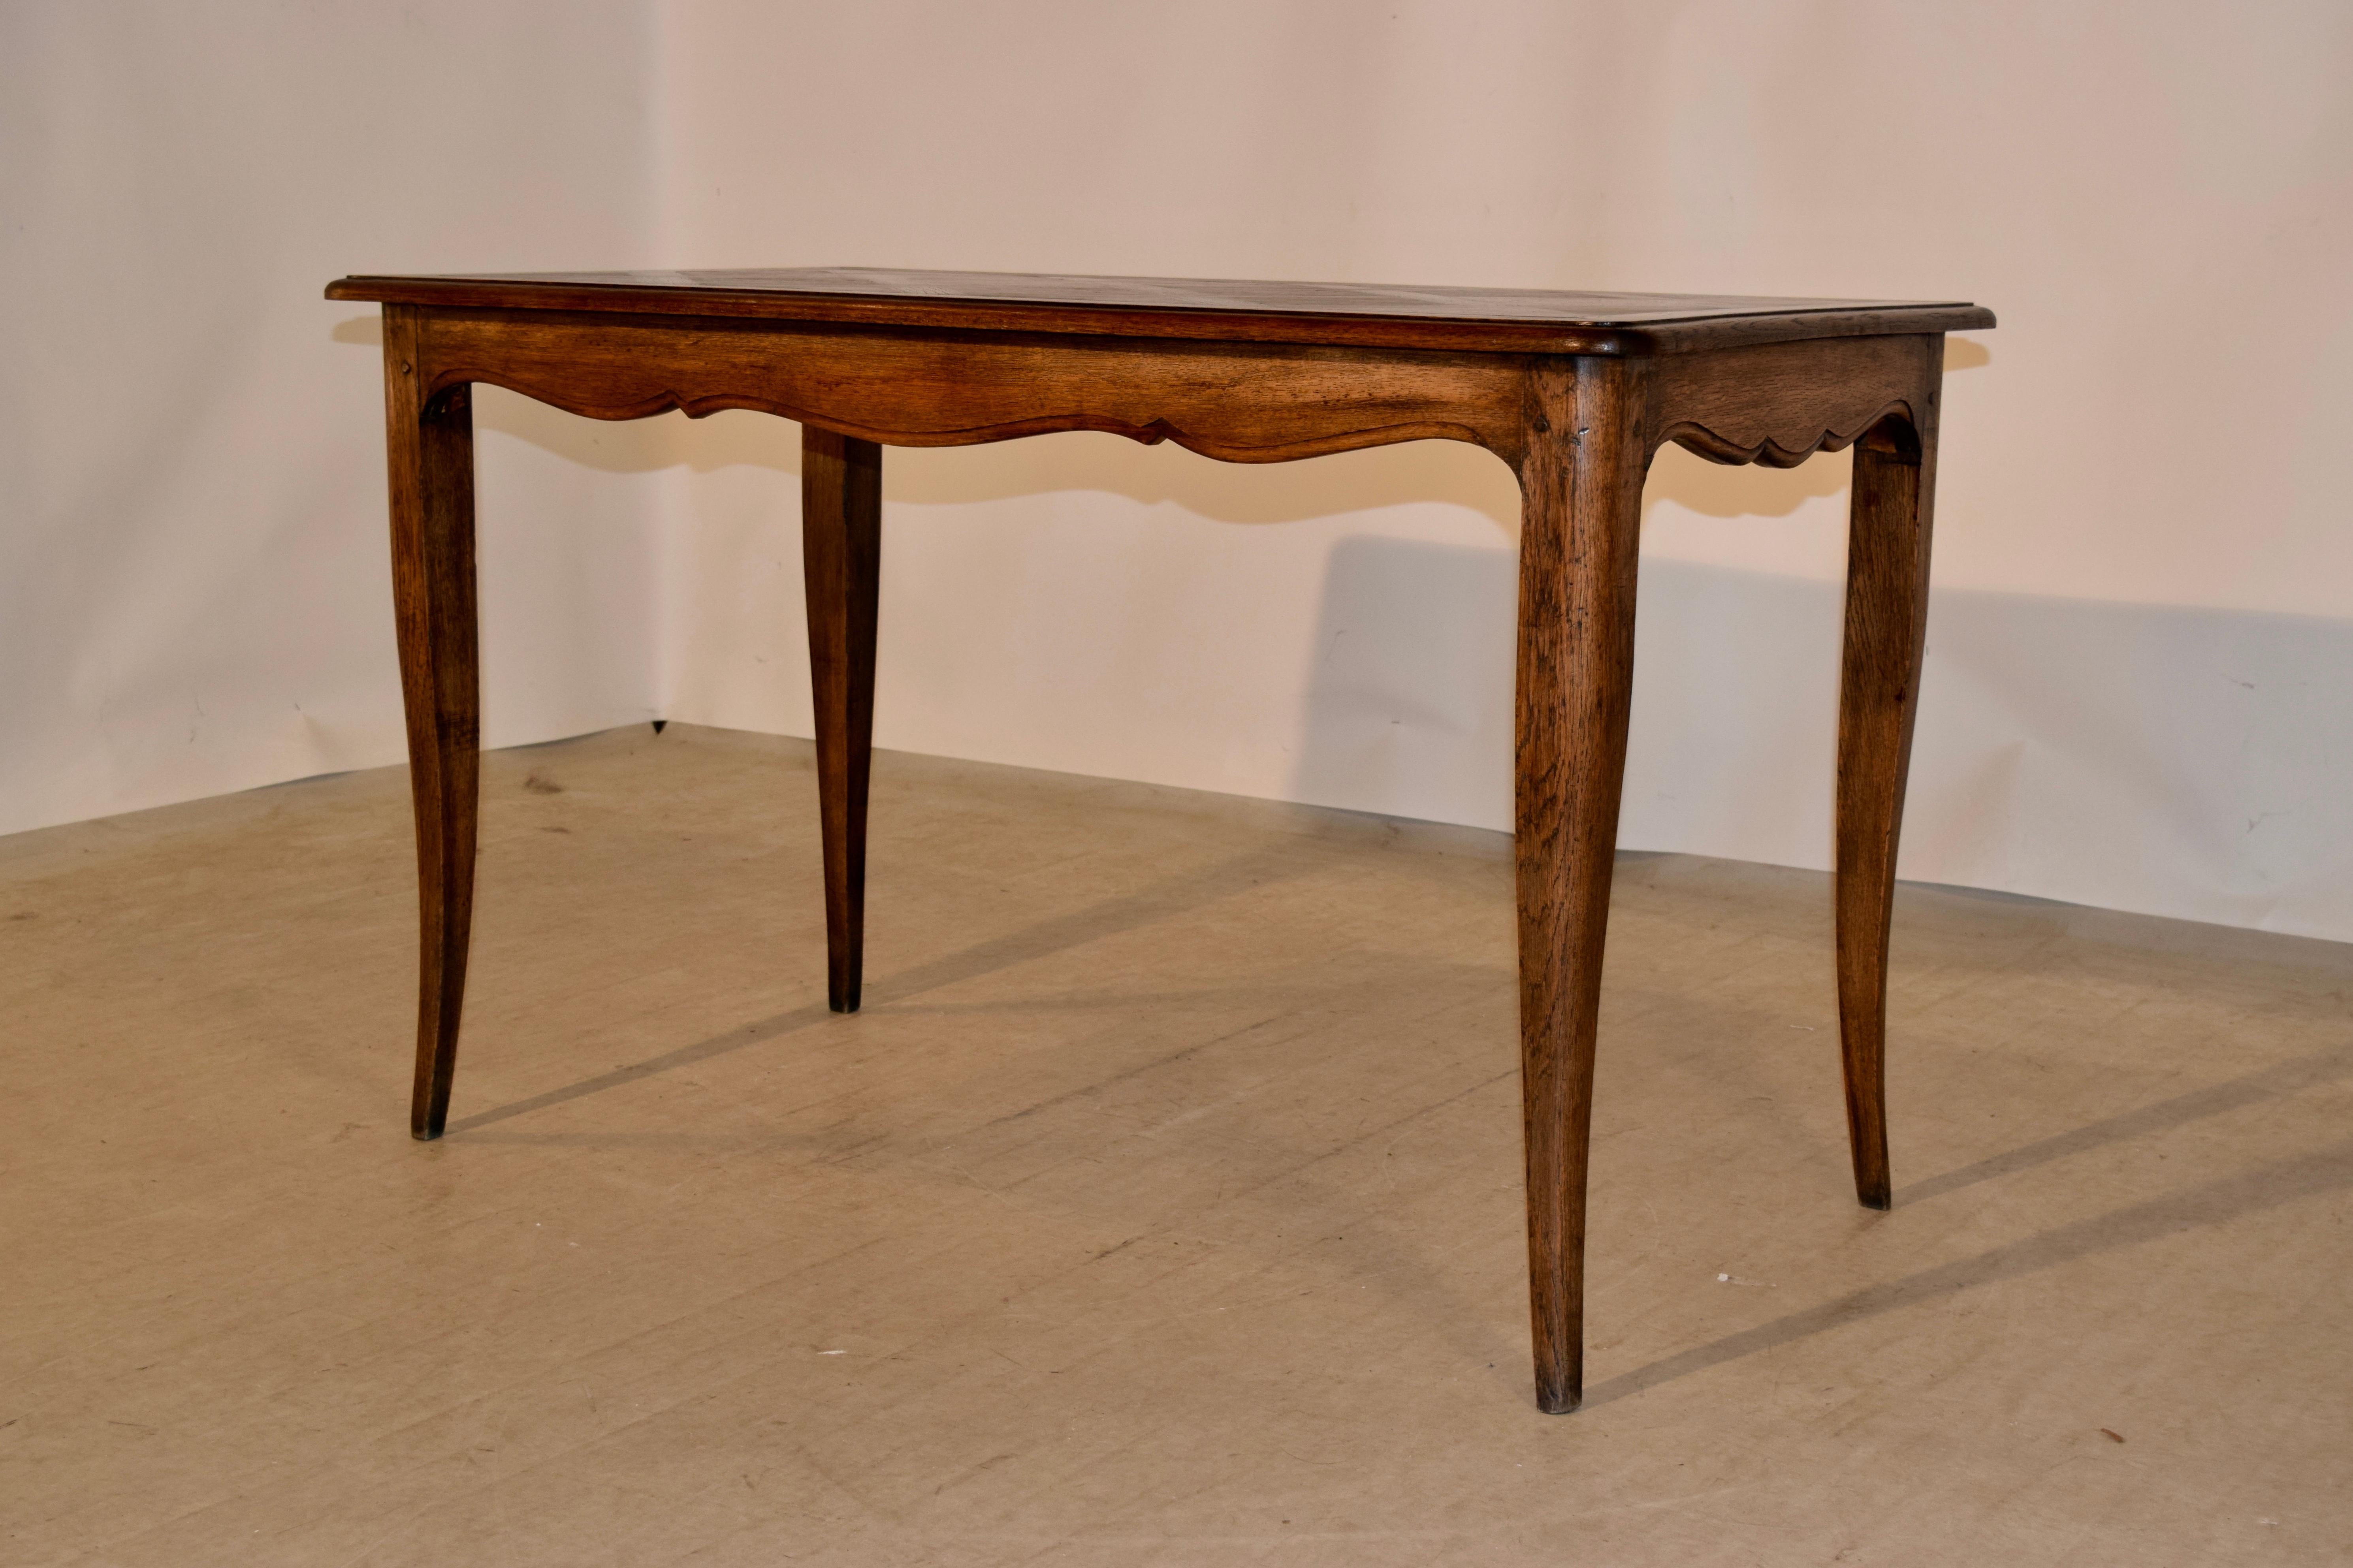 Late 19th century table with a lovely banded and bevelled edge surrounding a parquetry central panel. The apron is scalloped and has a bevelled edge and the table is supported on splayed cabriole legs. The apron measures 25 inches in height.